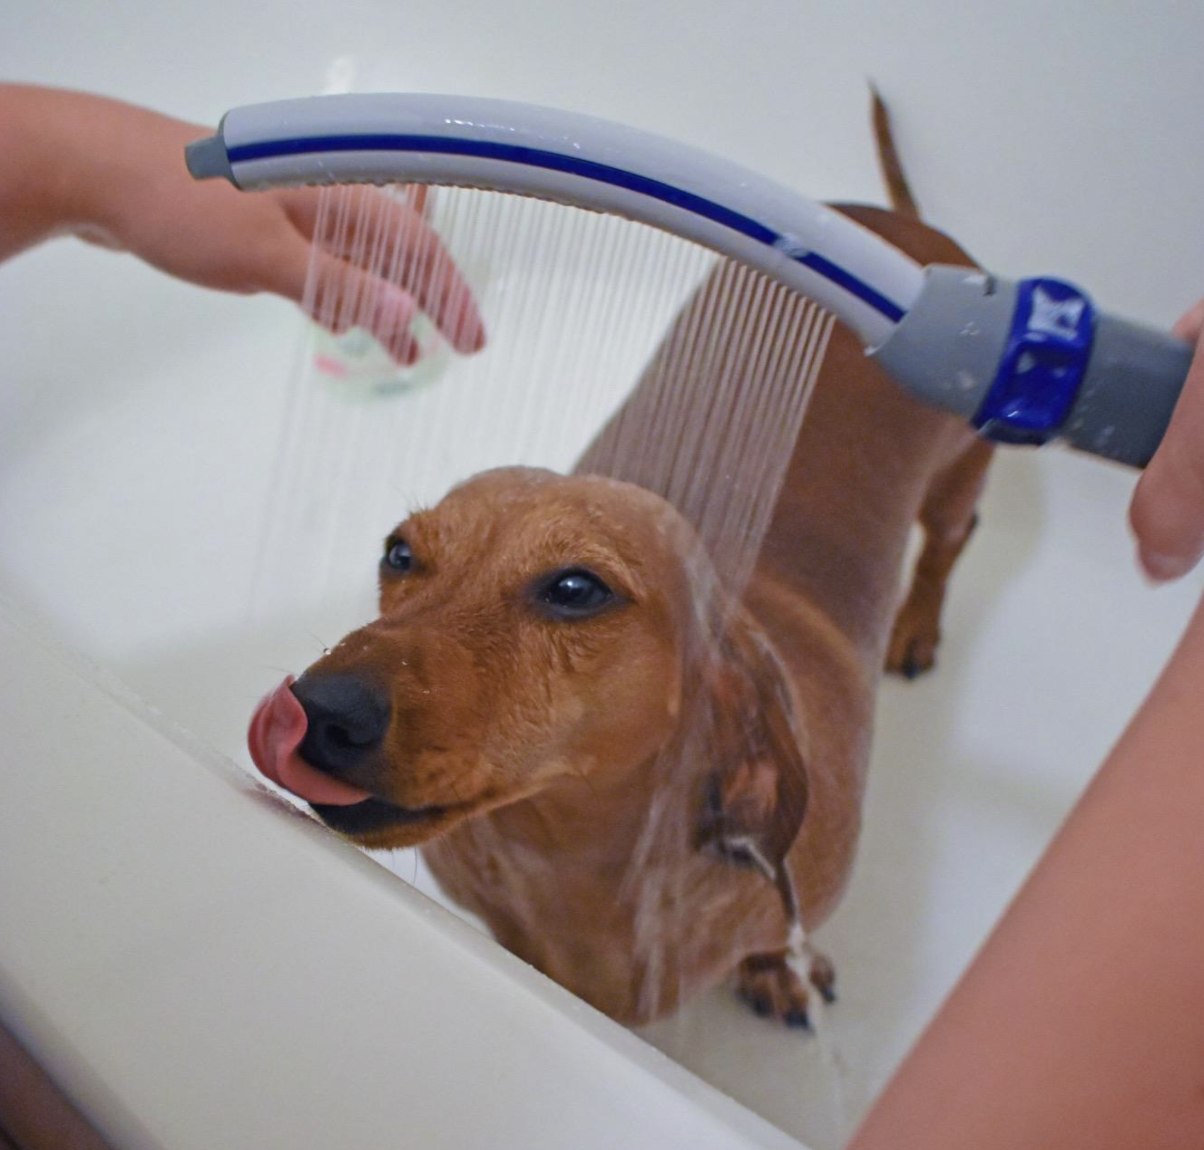 A customer review photo showing their dog getting a bath with the handheld dog shower attachment